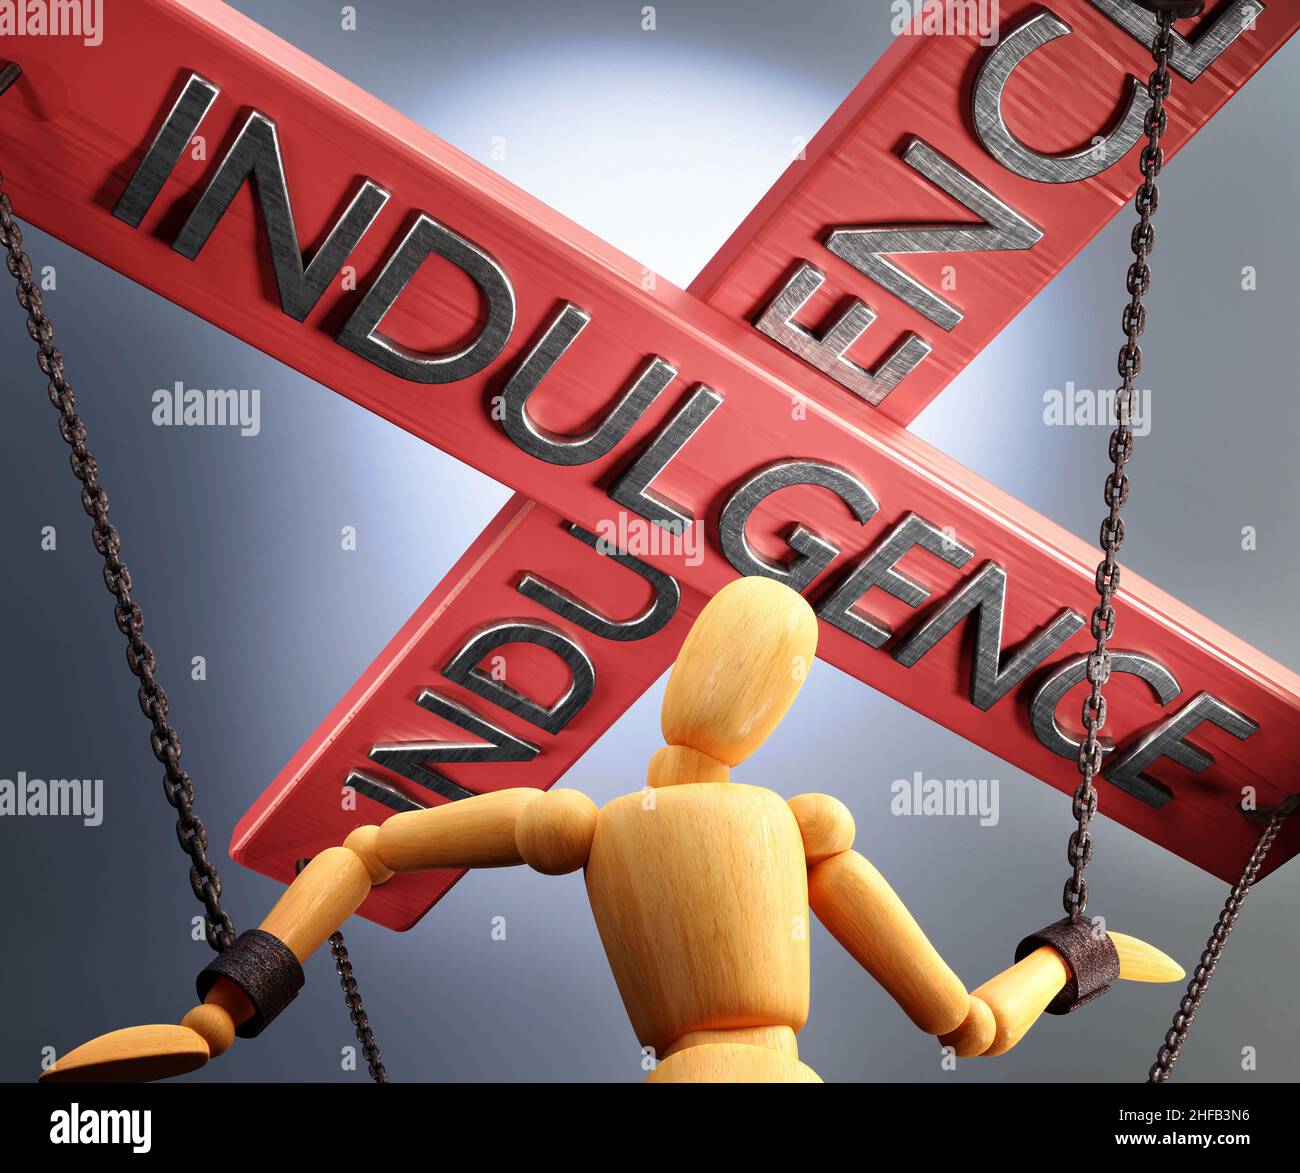 Indulgence control, power, influence and manipulation symbolized by control bar with word Indulgence pulling the strings (chains) of a wooden puppet, Stock Photo